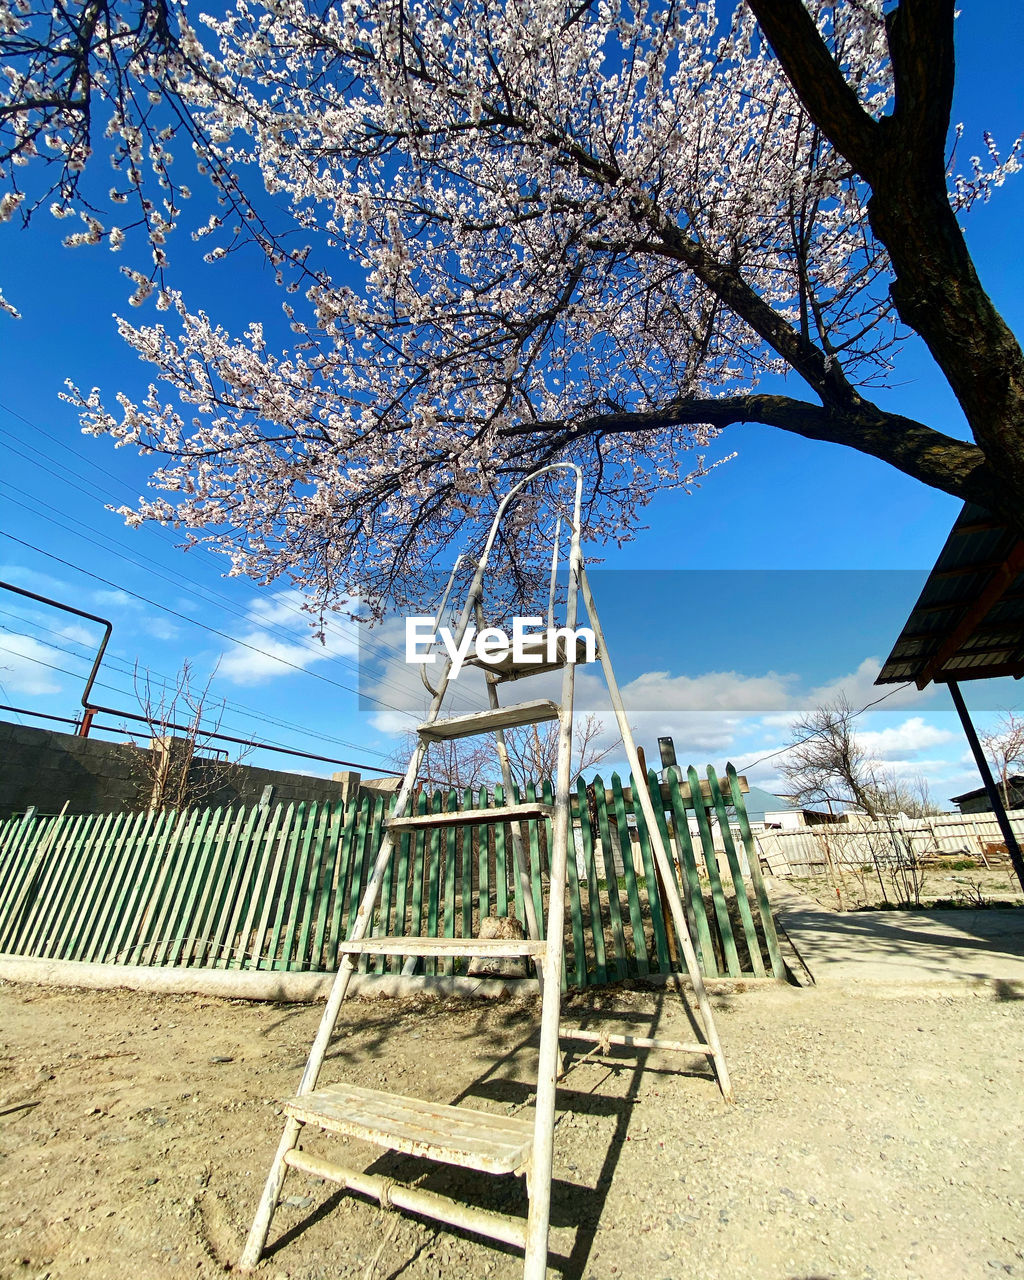 LOW ANGLE VIEW OF CHERRY BLOSSOM AGAINST SKY